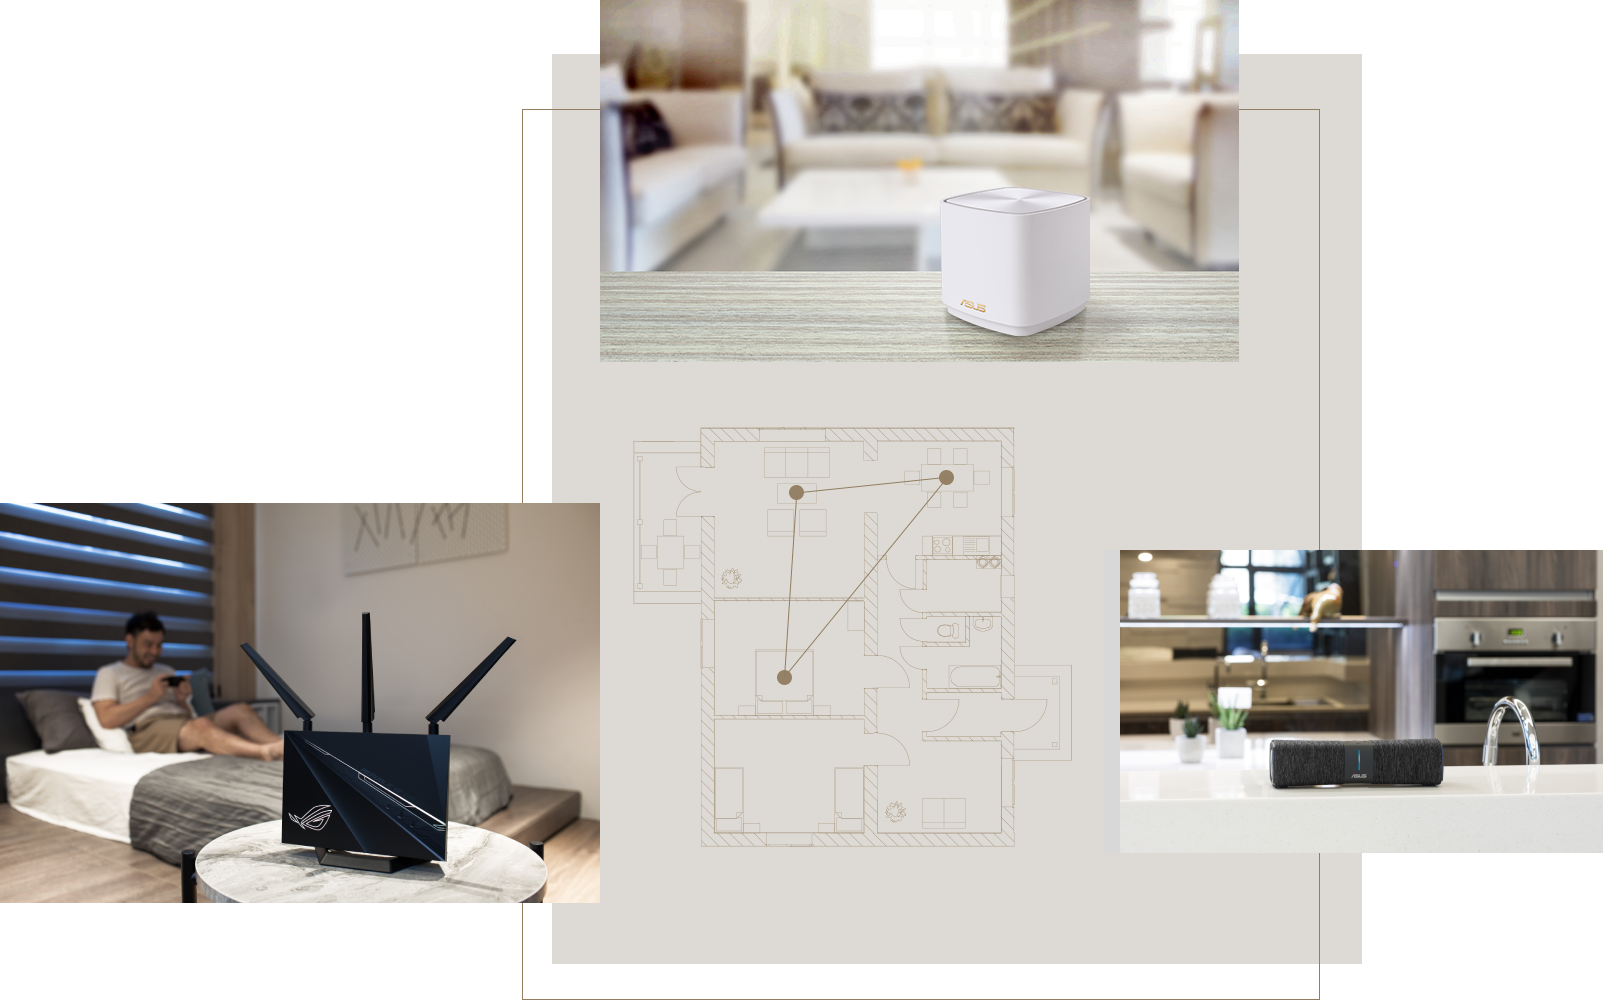 Build up your own mesh system with different ASUS routers with AiMesh technology.